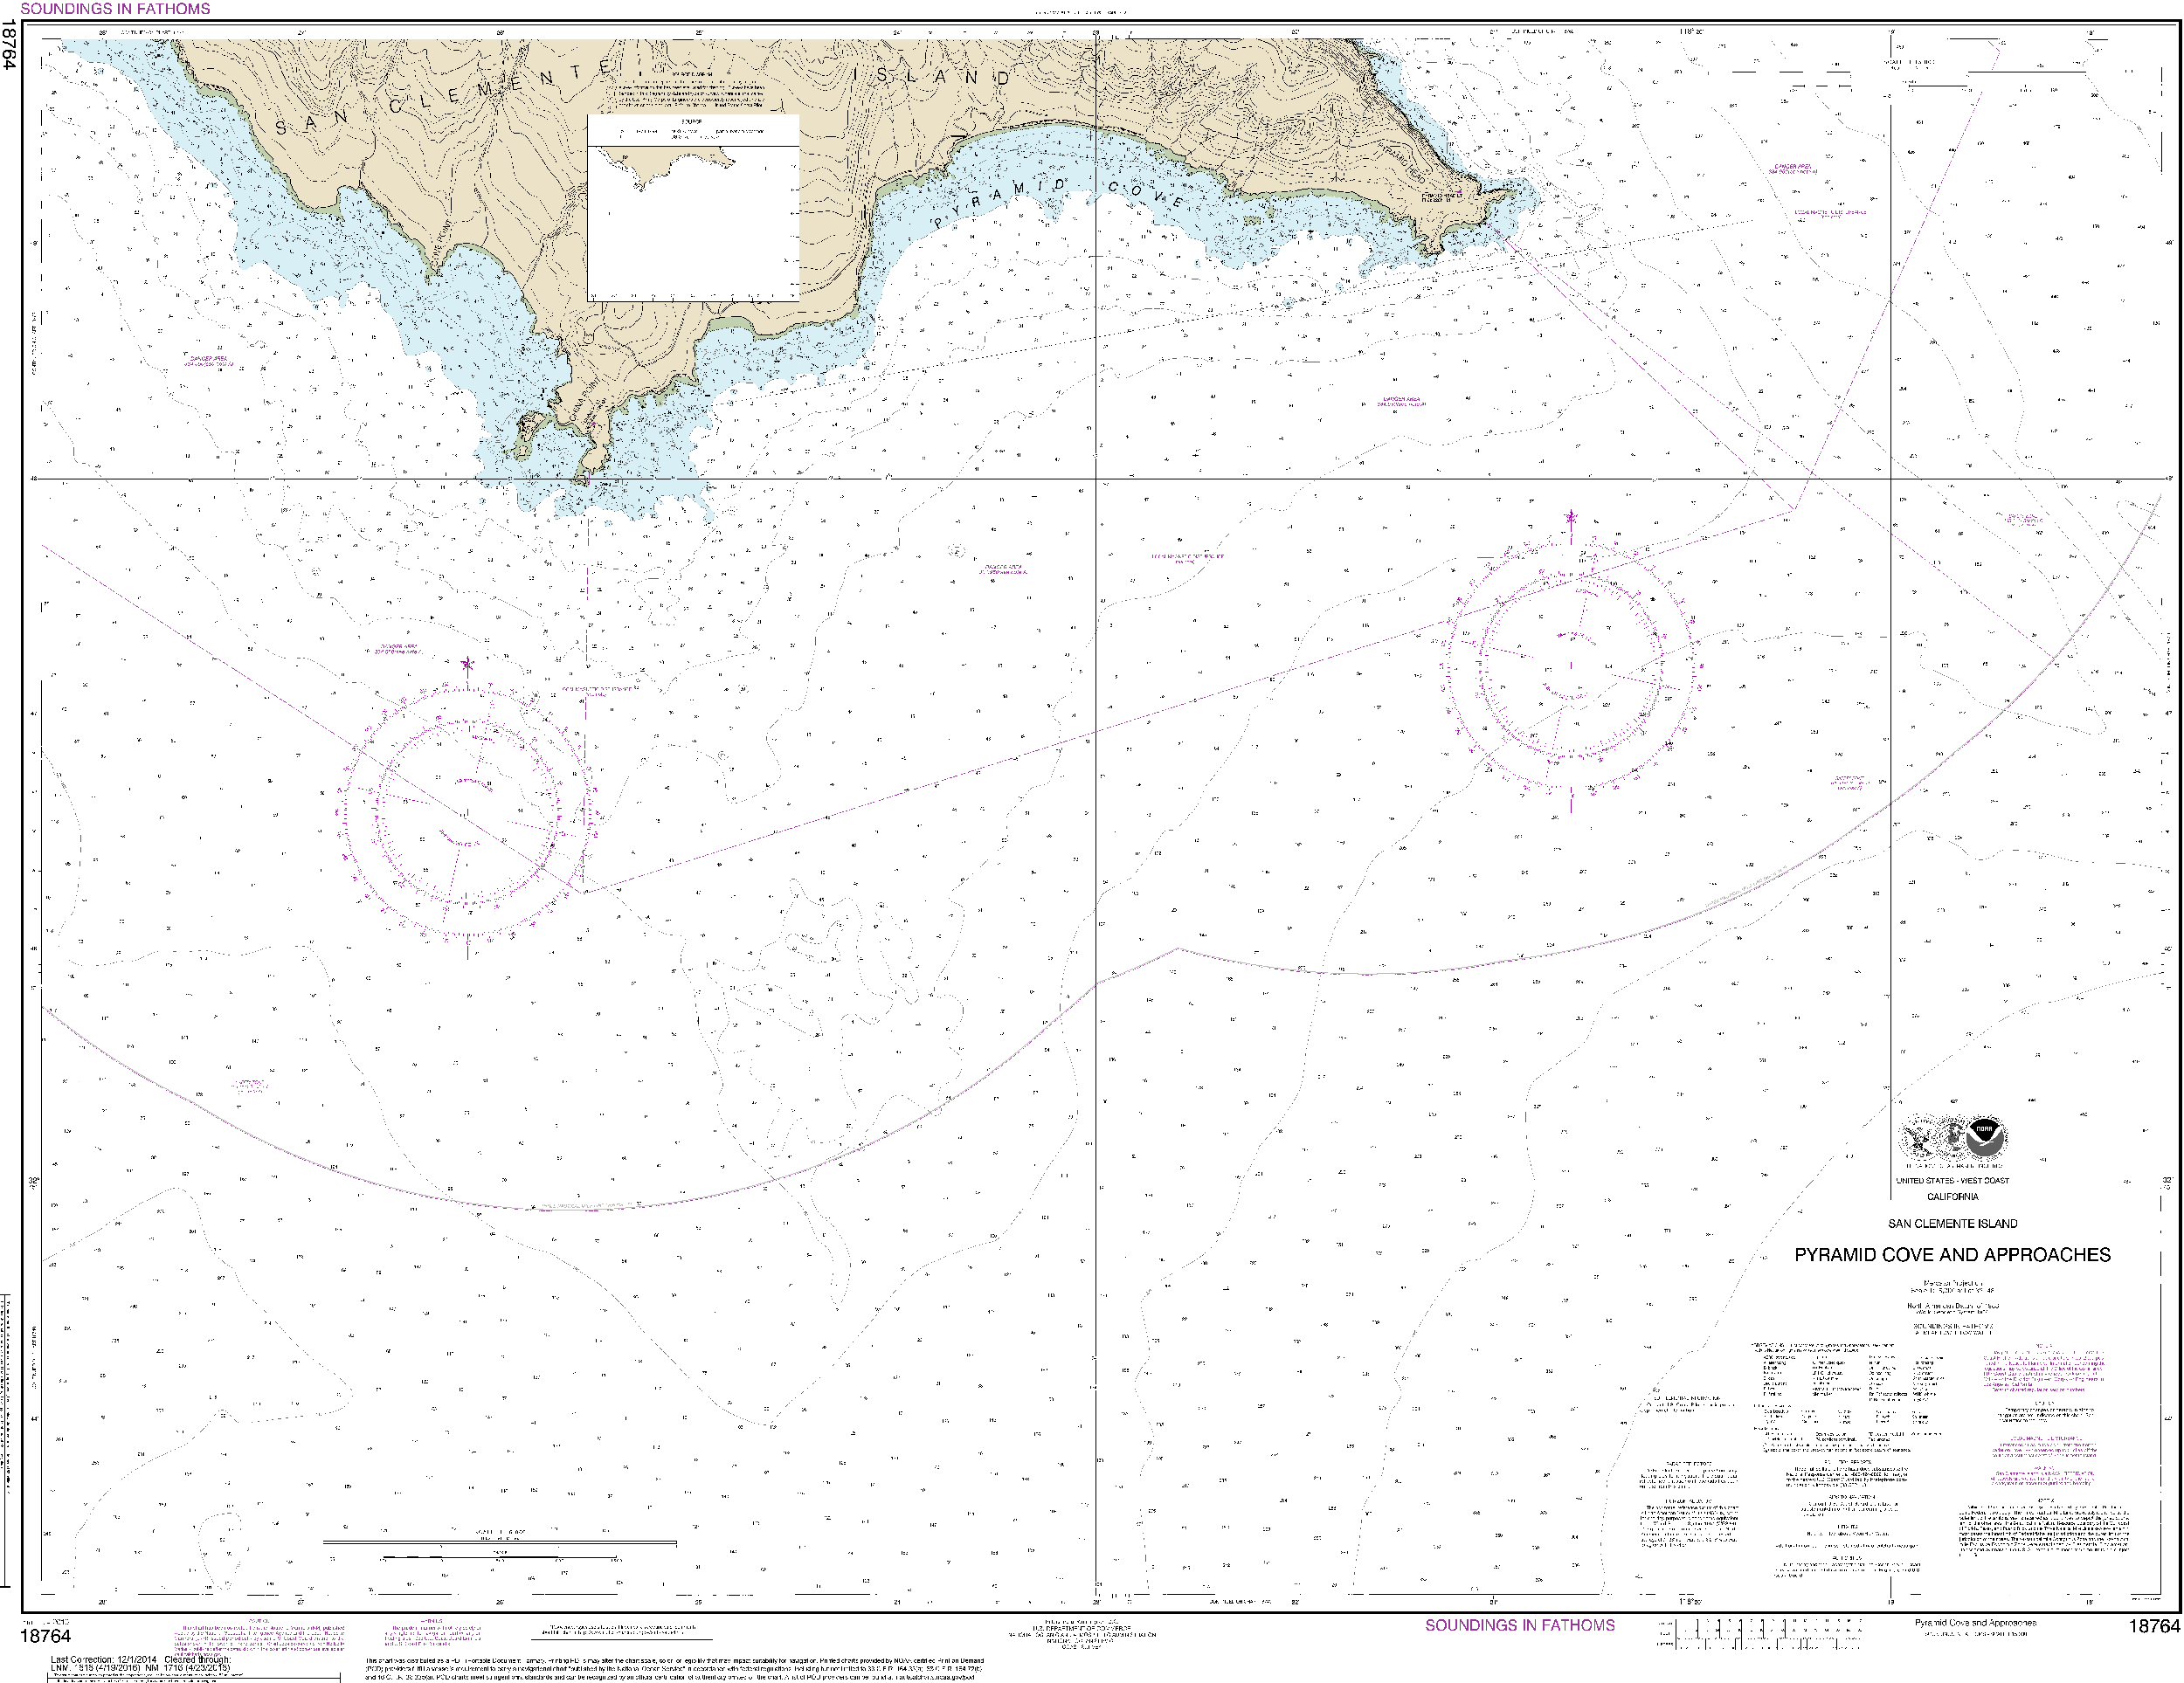 NOAA Nautical Chart 18764: San Clemente Island Pyramid Cove and approaches